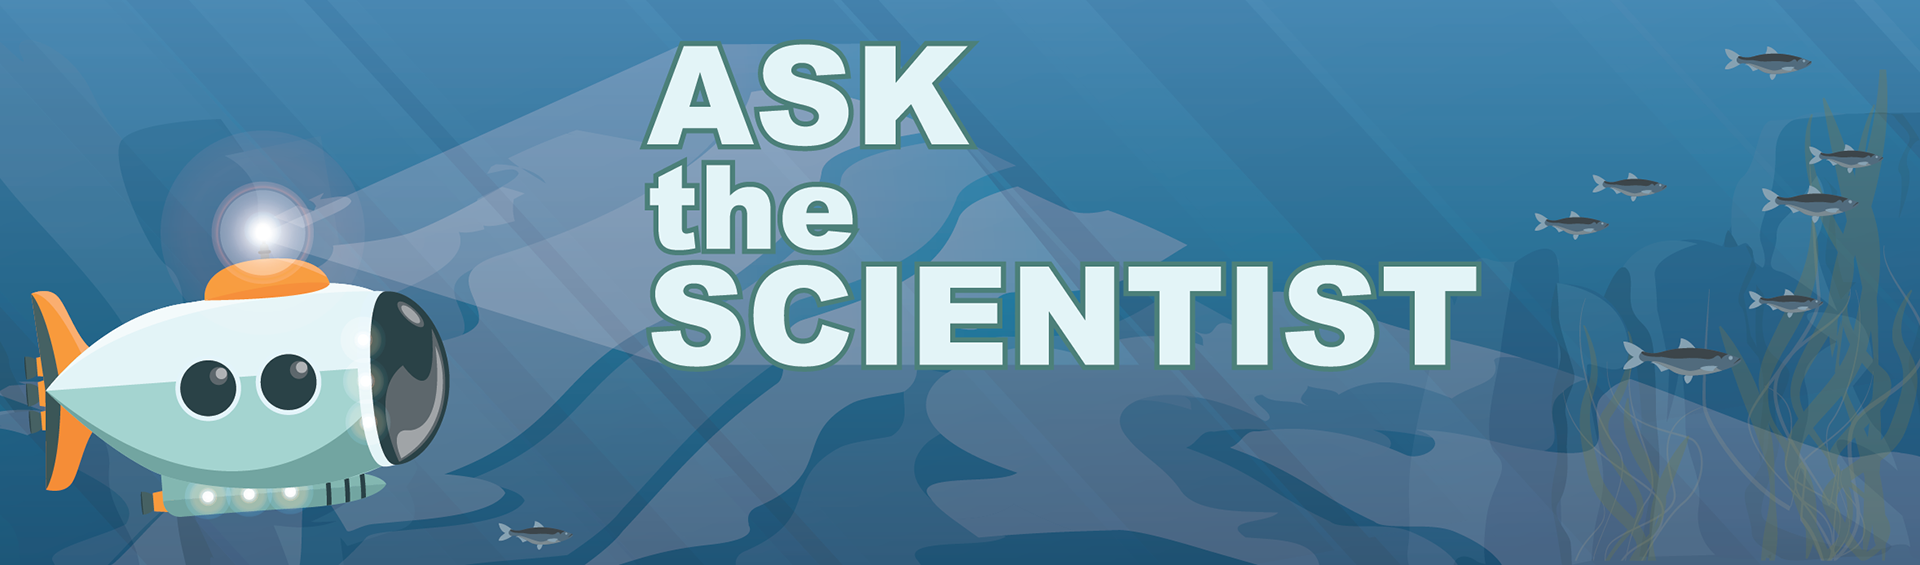 ask the scientist text with submarine and fish underwater art